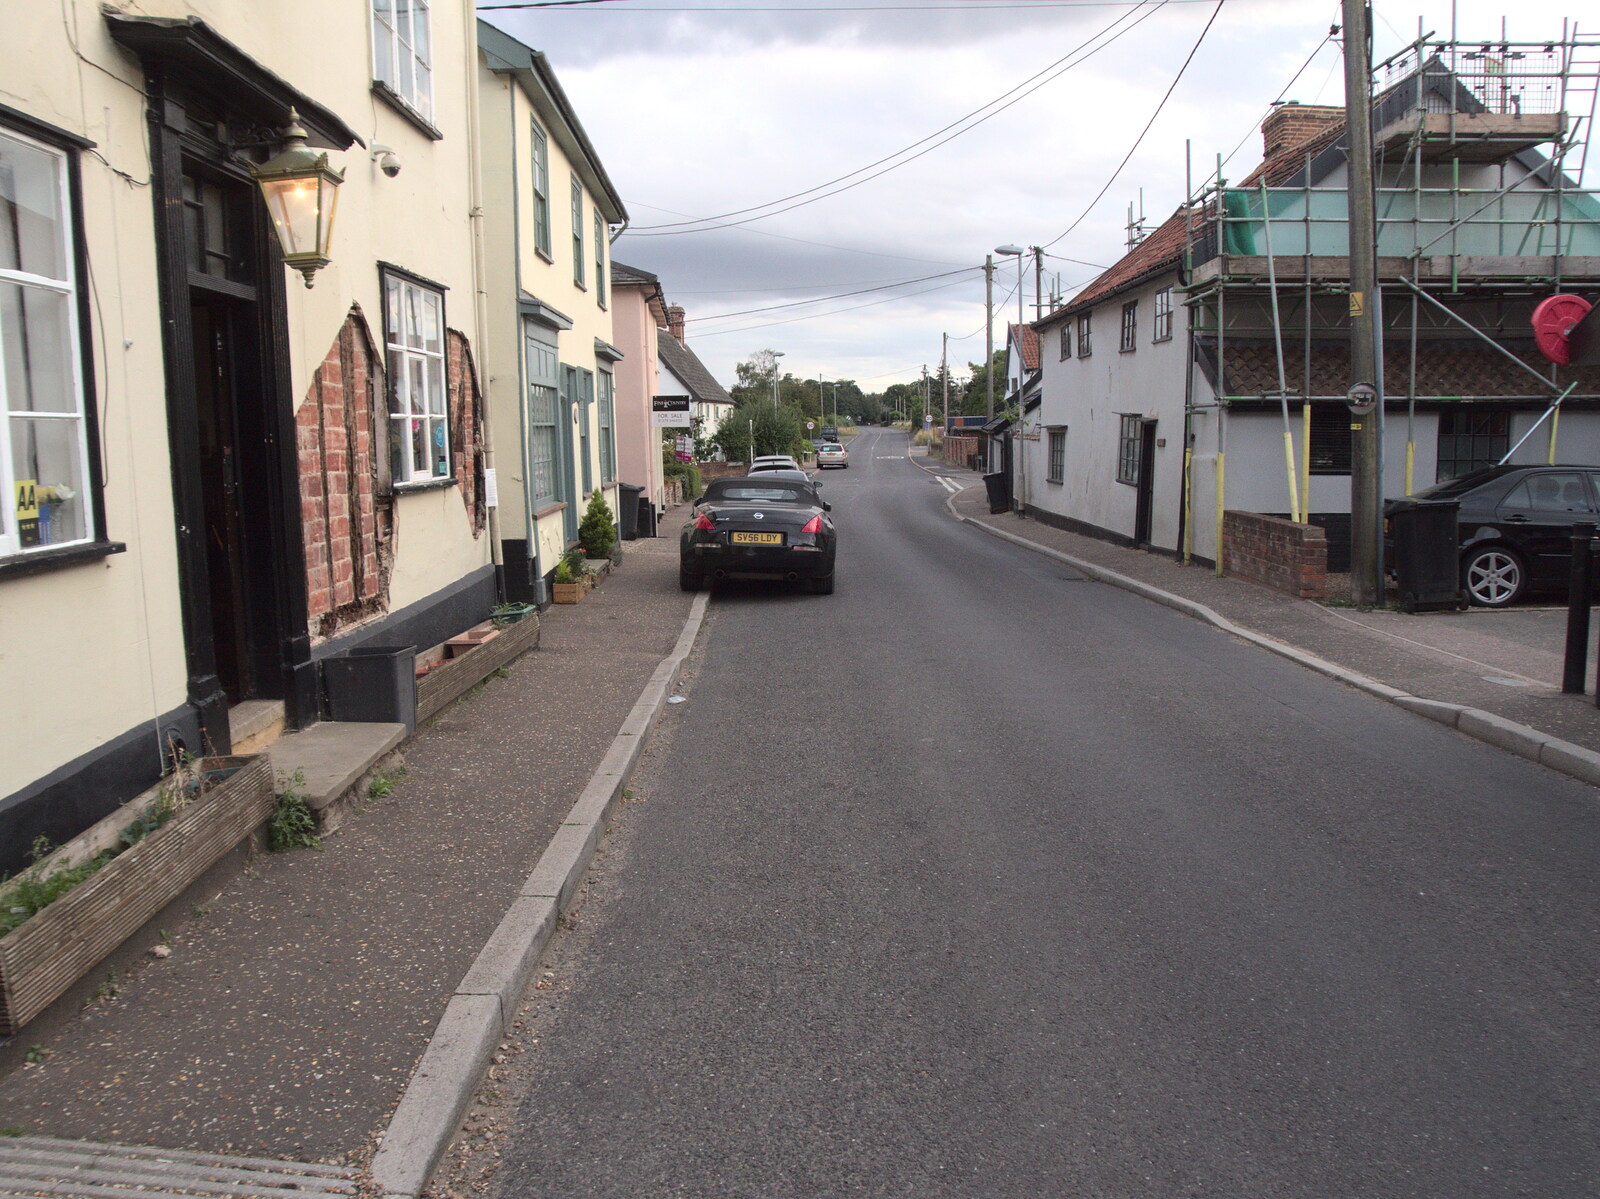 The Street in Dickleburgh from The BSCC at The Crown, Dickleburgh, Norfolk - 19th August 2021